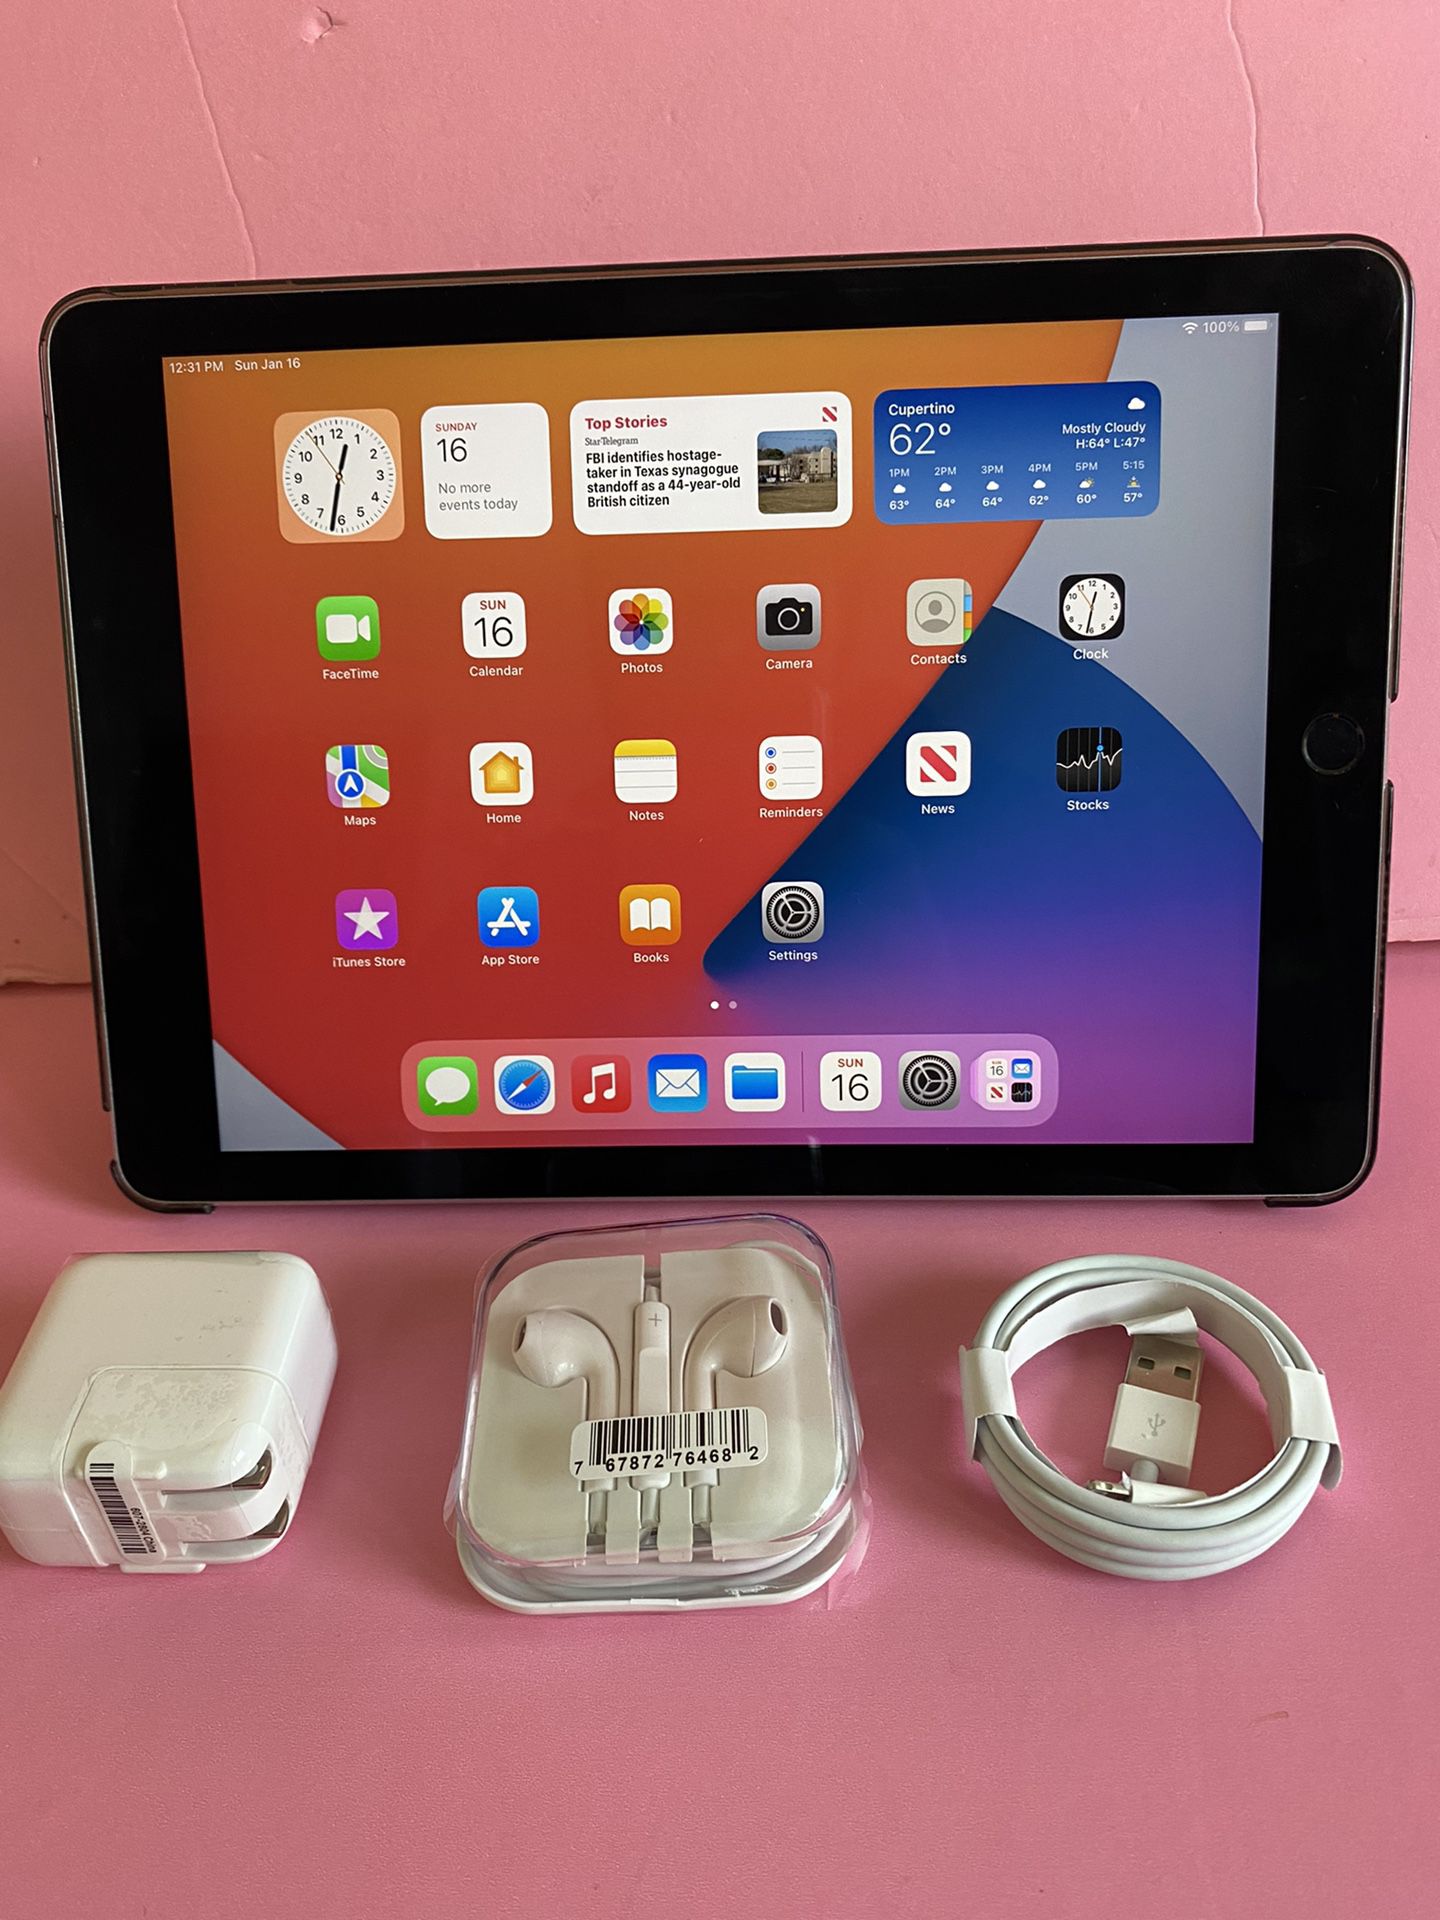 Apple IPad Pro 9.7” (Retina / Touch ID/ Latest IOS 15) 32GB WiFi + Cellular (AT&T, T-Mobile, Verizon etc) with Accesories (Apple Pen compatible)